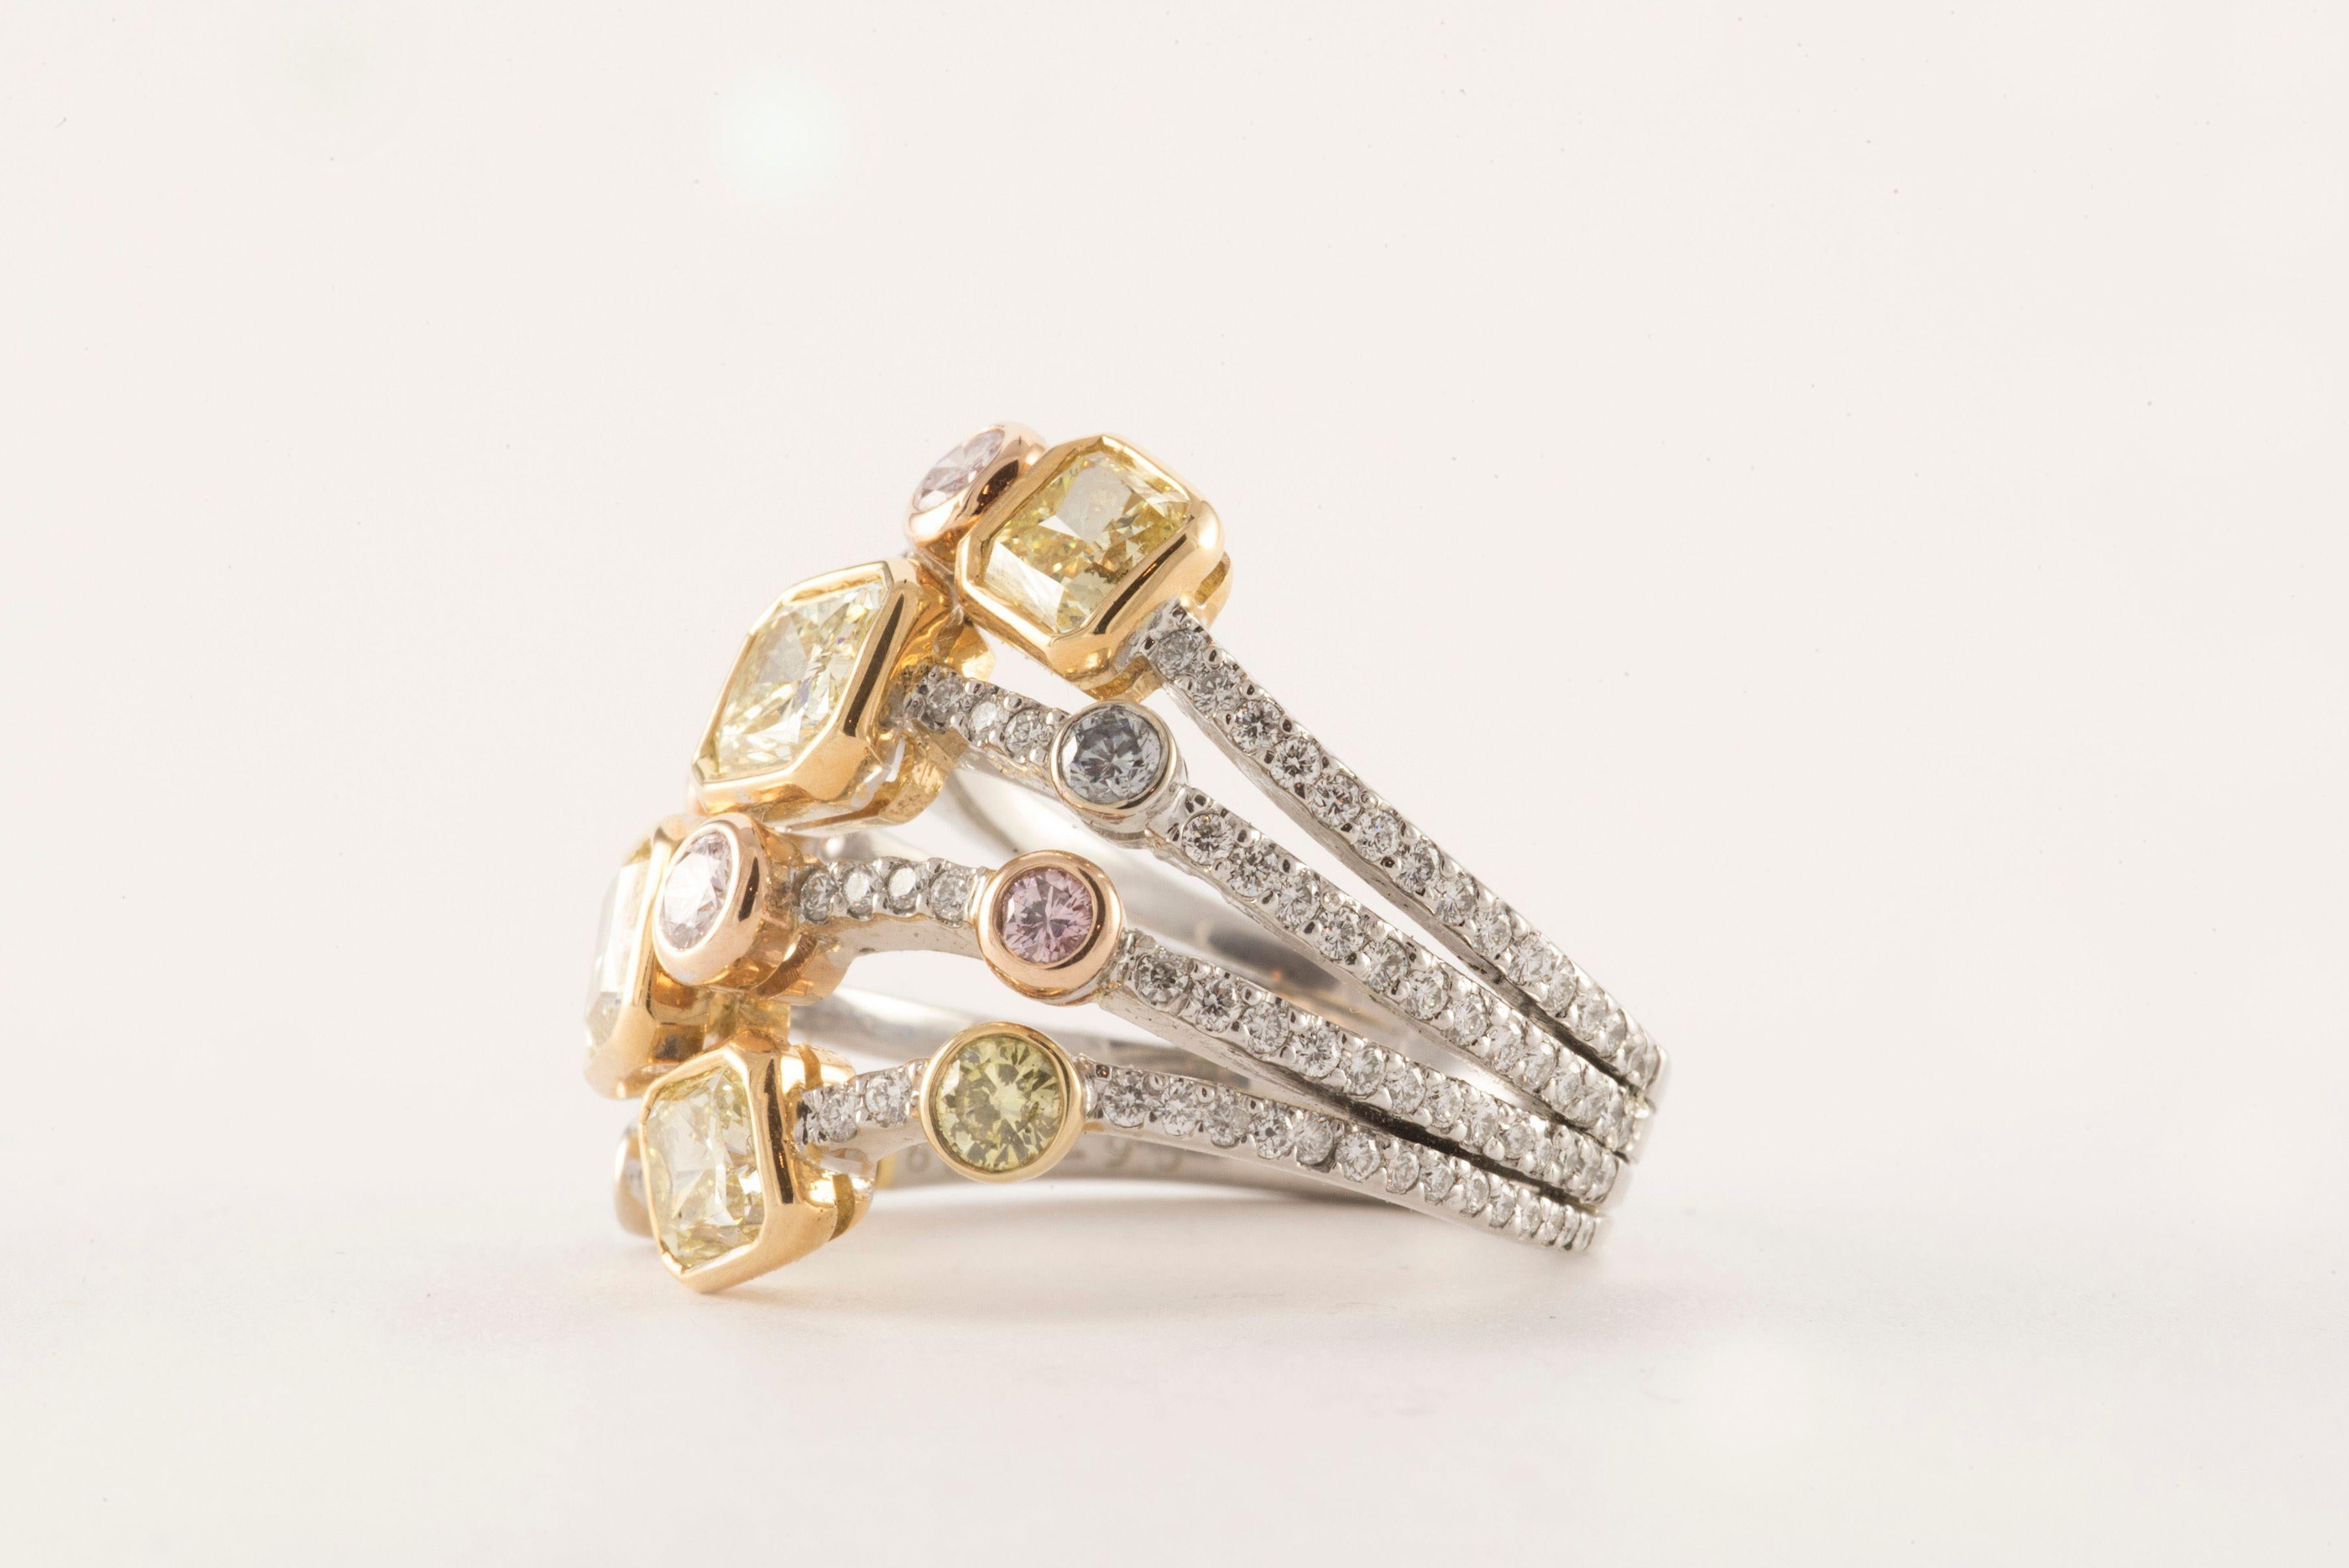 This two-toned magnificent Harem ring crafted from 18kt yellow gold and platinum features a mix of radiant cut and round natural fancy yellow, natural fancy pink, and natural fancy blue diamonds artfully placed atop four stacking bands embellished